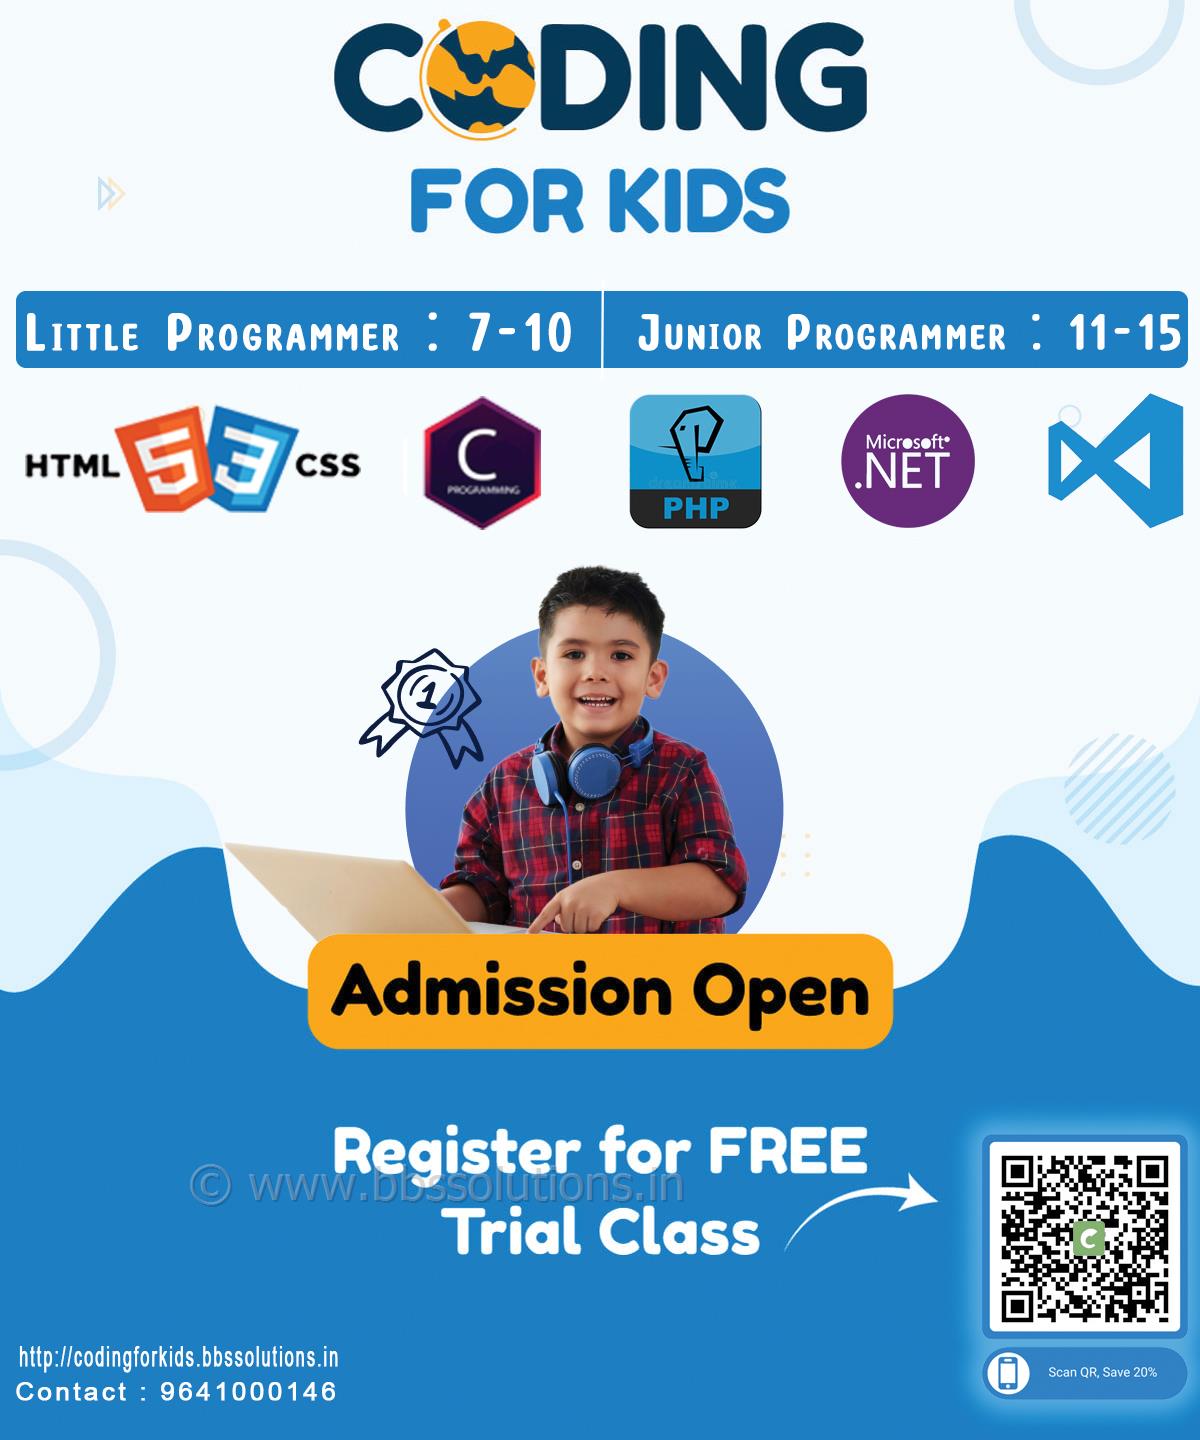 Unlock Your Child's Potential with Coding: Give Them a Head Start in t...  Business Boost Software Solutions do Best Software ,Web Development,Mobile App solutions provider in siliguri , india, WestBengal , Assam , Siliguri , Jalpaiguri ,Dhupguri,
    Best website designing in Siliguri with affordable packages and quick support. Get effective website design in Siliguri from best website designers. #bbssolutions , #SEO  , #DigitalMarketing  , #WebDesign  , #SoftwareDevelopment  , #FacebookAds  , #GoogleAds  , #GoogleSEO  , #WebsiteDesigning 
     , #Software  , #website  , #BusinessBoostSoftwareSolutions  , bbssolutions,SEO, Digital Marketing, WebDesign, Software Development, Facebook Ads, Google Ads, Google SEO, Website Designing, 
    Software, website, Business Boost Software Solutions, 9641000146,7478180650,best GST software in West bengal,Best GST software company in north bengal,GST solution in west bengal
    ,gst solutions in north bengal,best customize software in siliguri , india,best customize software in west bengal,best customize software in dhupguri,news portal website in west bengal
    ,news portal website in siliguri , india,regional news portal website in siliguri , india,school software in west bengal,school software in north bengal,school website in north bengal,
    school software in north bengal,android app, ios app, ecommerce website, ecommerce software,Web designing, website designing, ecommerce website, how to make website, create website, 
    website development company, web page design, seo, search engine optimization, seo siliguri , india , 
    seo company, best seo company, seo services, responsive web design, web designing companies, 
    how to create a website, internet marketing, digital marketing, online marketing, social media marketing, 
    promotion,web designing in Siliguri,web designing in Siliguri siliguri , india,web designing in siliguri , india,GST Software  ,  GST Billing Software  ,  GST Accounting  ,  GST Ready Software,
    software company in siliguri,software company in siliguri siliguri , india,software company in north east siliguri , india,
    school software in siliguri,school software in north east siliguri , india,customize software,free software demo,
    reasonable price software,cost effective software,resonable price software,free demo software,free software,best software support,free software support,best software company in siliguri , india,
    best software company in siliguri,MLM Software company in Siliguri,Binary Software company in Siliguri,
    top ten software company in north bengal,top ten software company in siliguri,top ten software company in siliguri , india,
    top ten software company in north east,software development siliguri , india,west bengal,kolkata,siliguri , software company in siliguri , india
     , software development west bengal , Customized software siliguri , india , software for hotel,medicine distributors,
    jewellery shop , best software company in siliguri,jalpaiguri,sikkim,darjeeling  , Business Boost Softwate Solutions  ,  
    Web designing company in siliguri  ,  ecommerce designing company in siliguri  ,  web development company in siliguri  ,  
    software development comapny in siliguri  ,  software development in sikkim  ,  website designing company in sikkim  ,  
    SEO service in sikkim  ,  web designing company in siliguri  ,  web designing compnay in North Bengal  ,  
    SEO service in siliguri  ,  web designing in north bengal  ,  web designing in north east siliguri , india , website designing in siliguri, best website designing in siliguri, web design, web designer in siliguri, web designing company siliguri